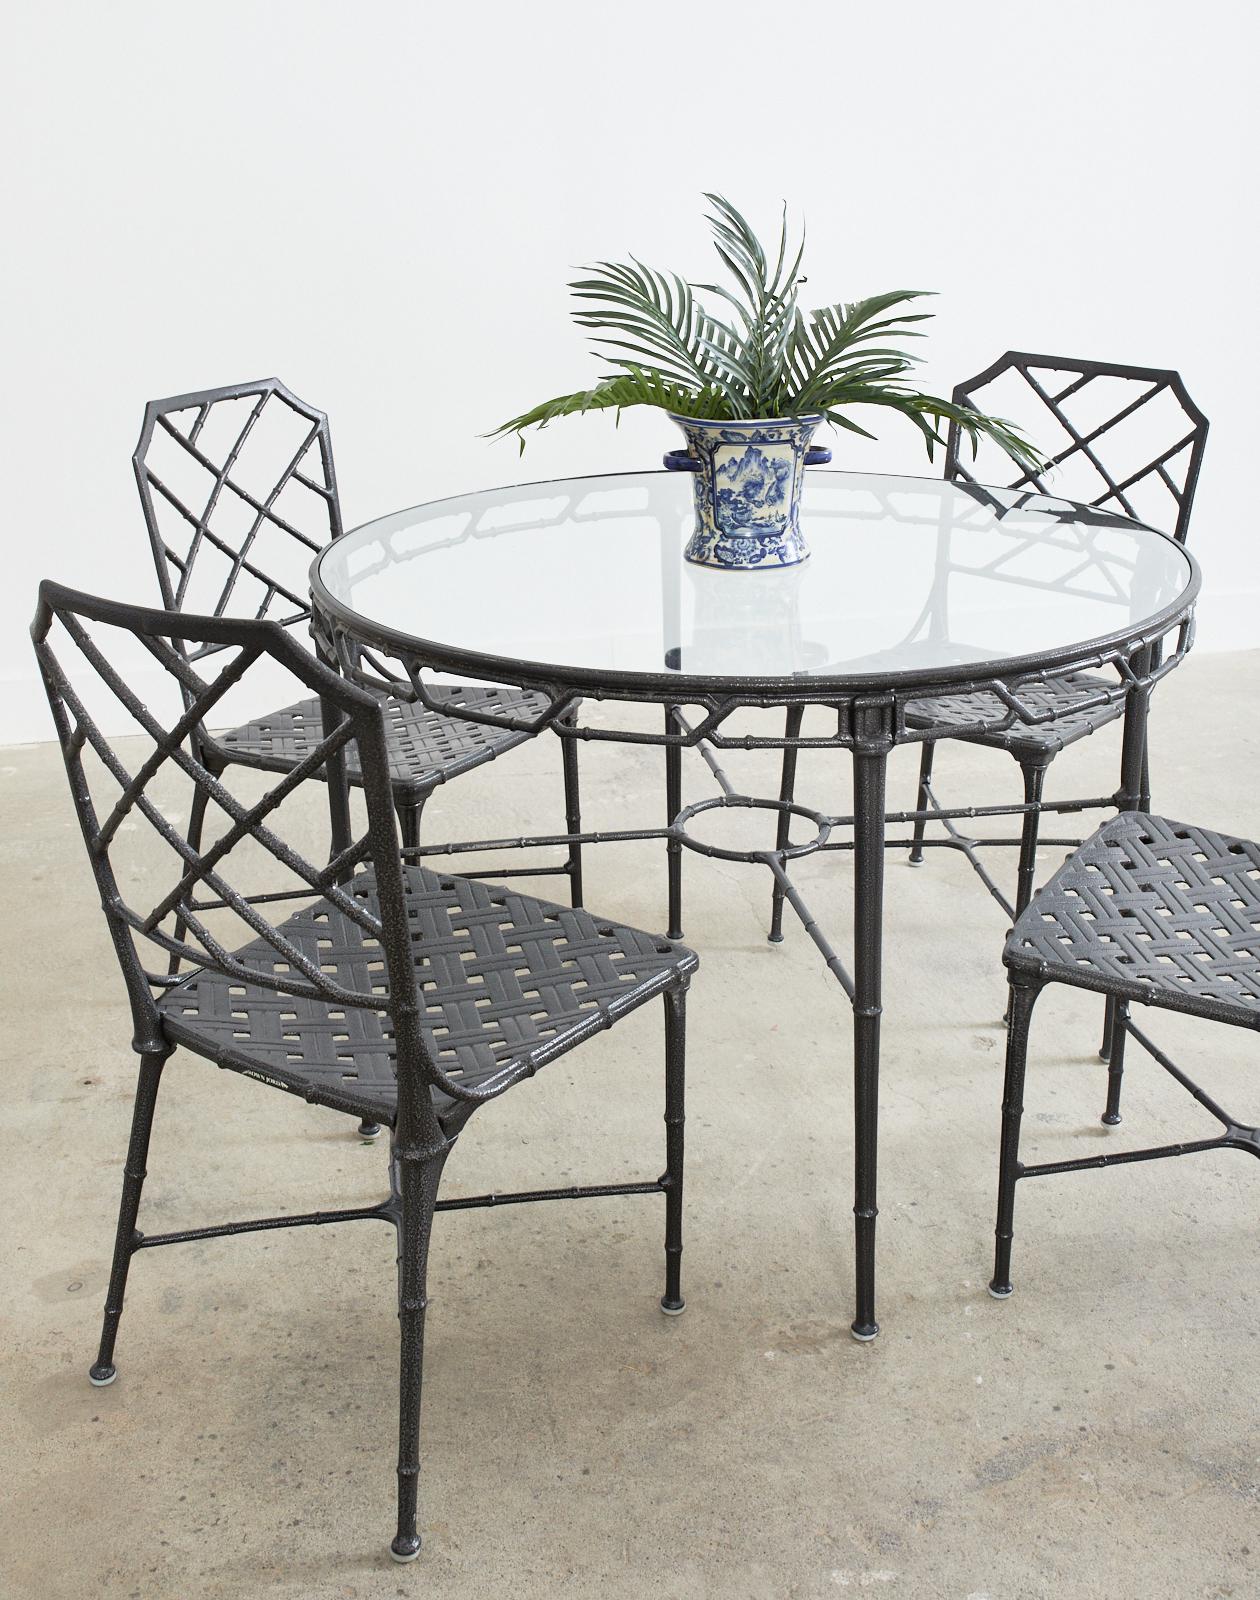 Iconic set of Calcutta patio and garden dining chairs and round 42 inch table designed by John Caldwell for Brown Jordan. Constructed from cast aluminum with a textured charcoal powder coated finish. The frames have a faux bamboo motif designed in